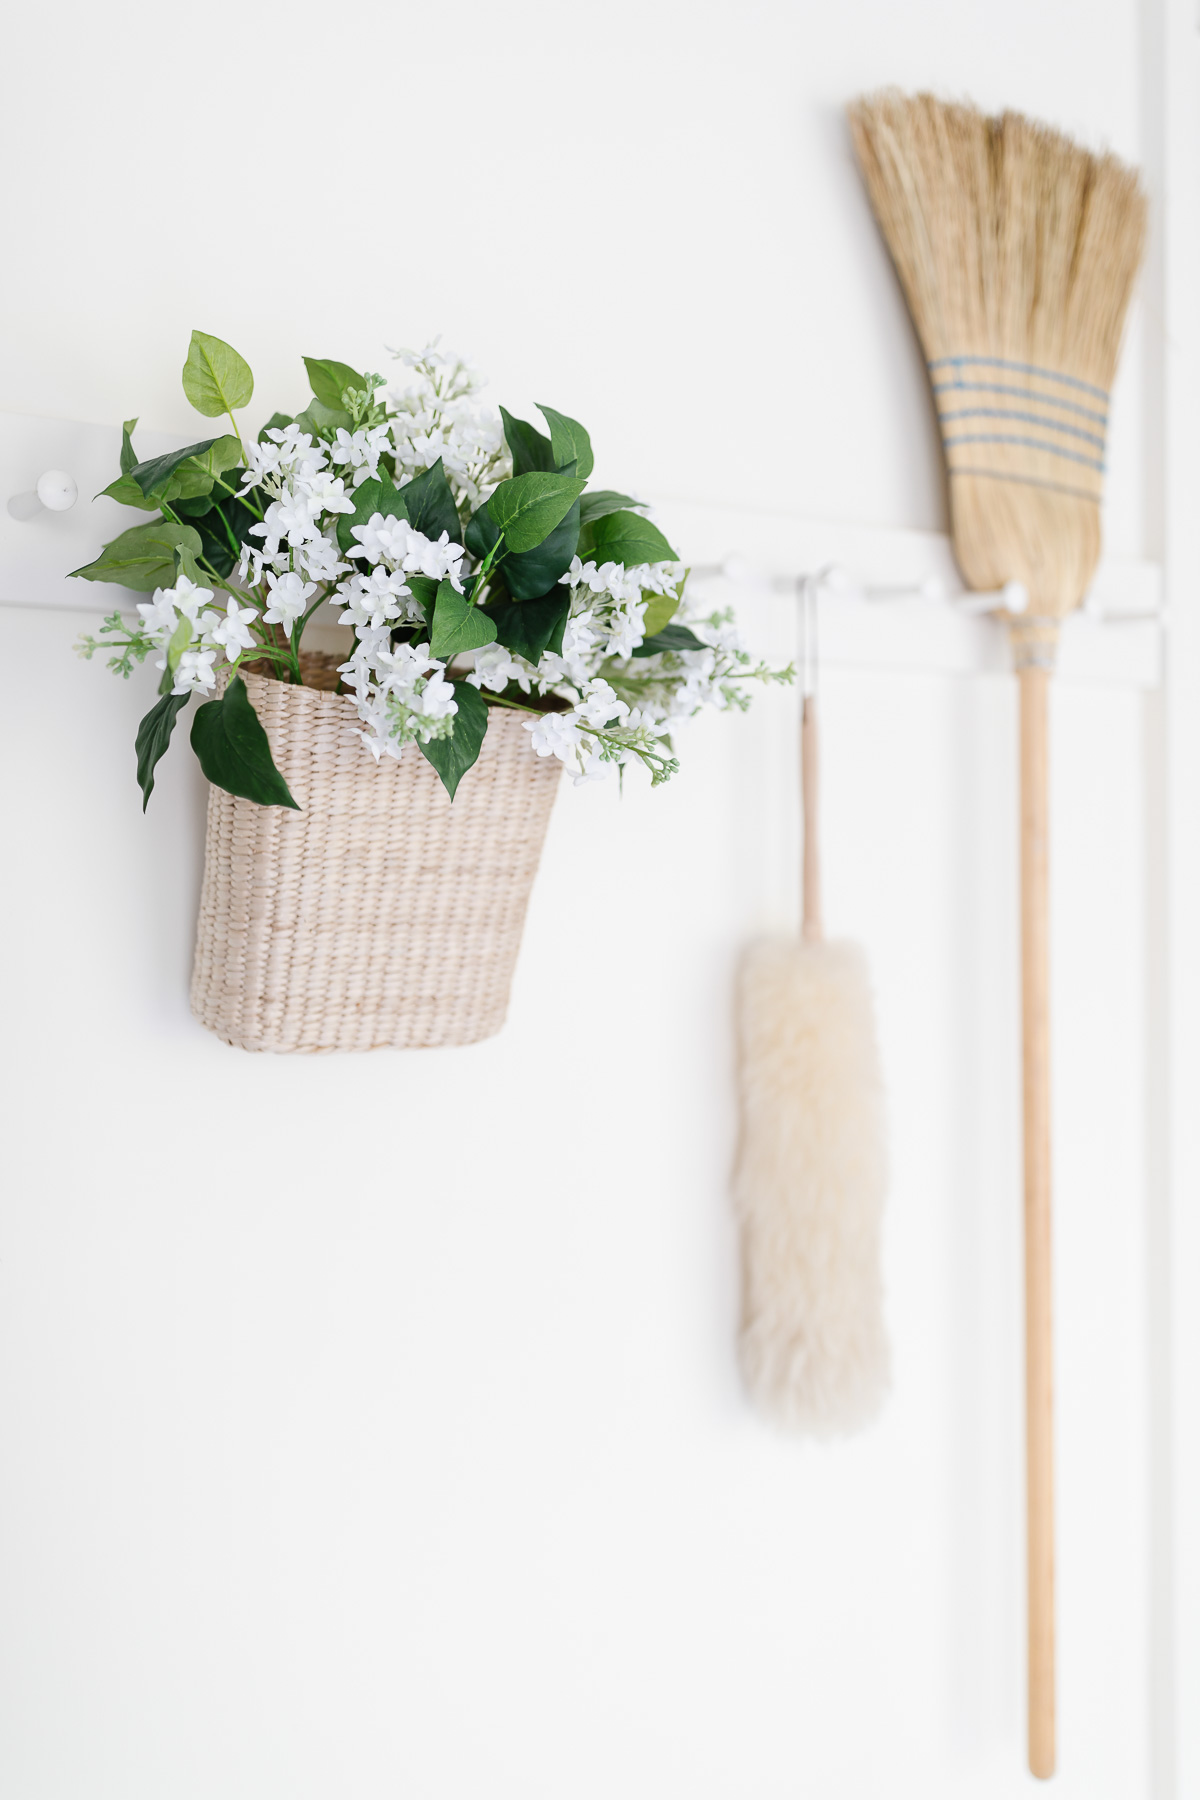 On the wall next to a basket of flowers, a broom is hanging.